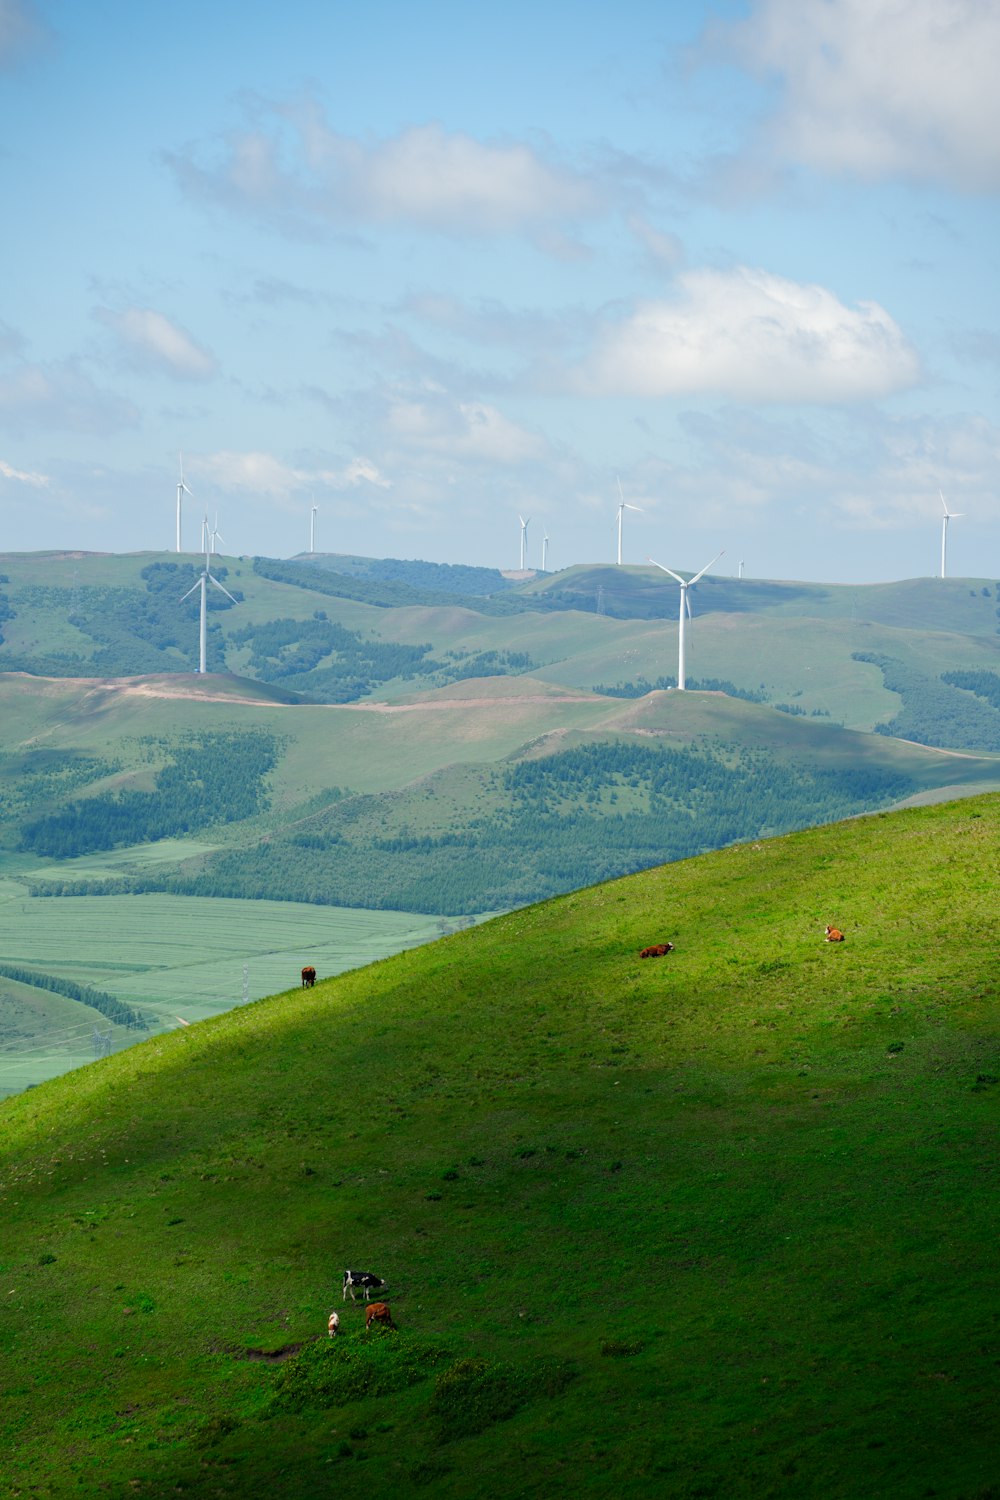 a grassy hill with wind mills in the distance